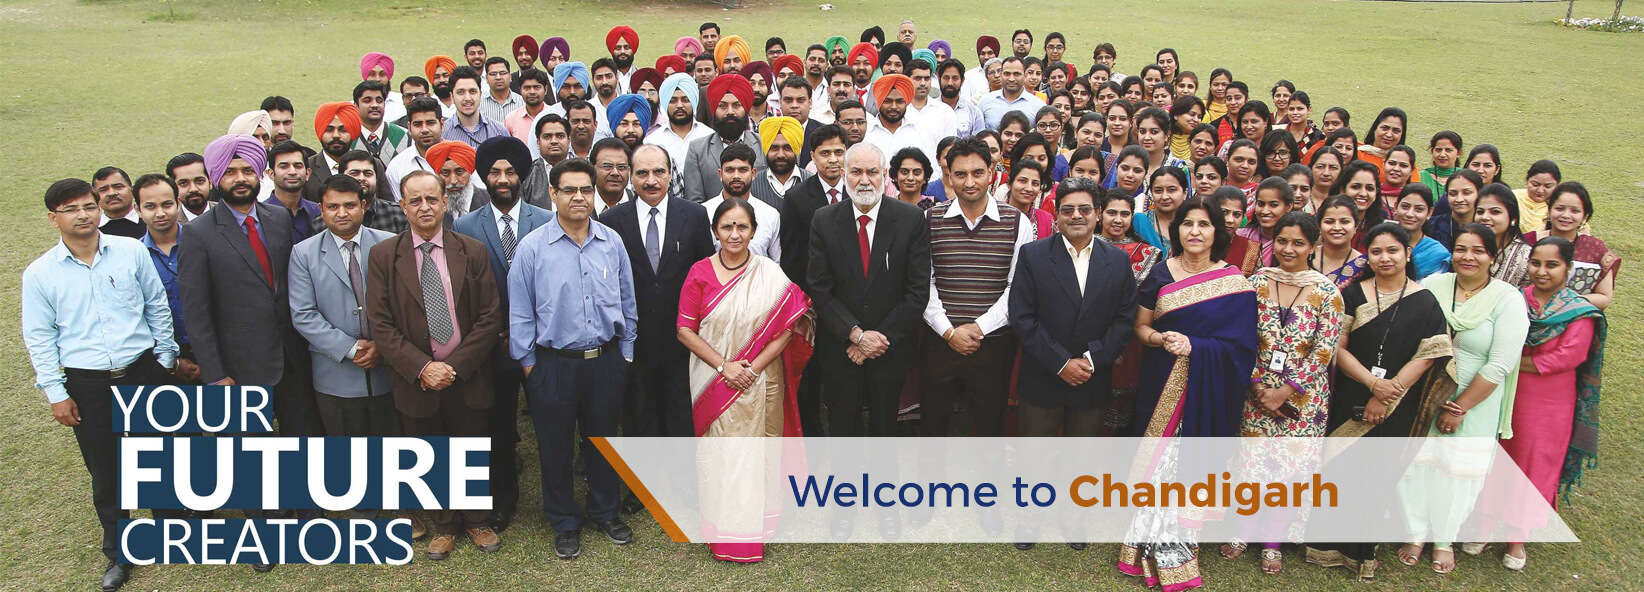 Top/Best Colleges in Chandigarh, Punjab